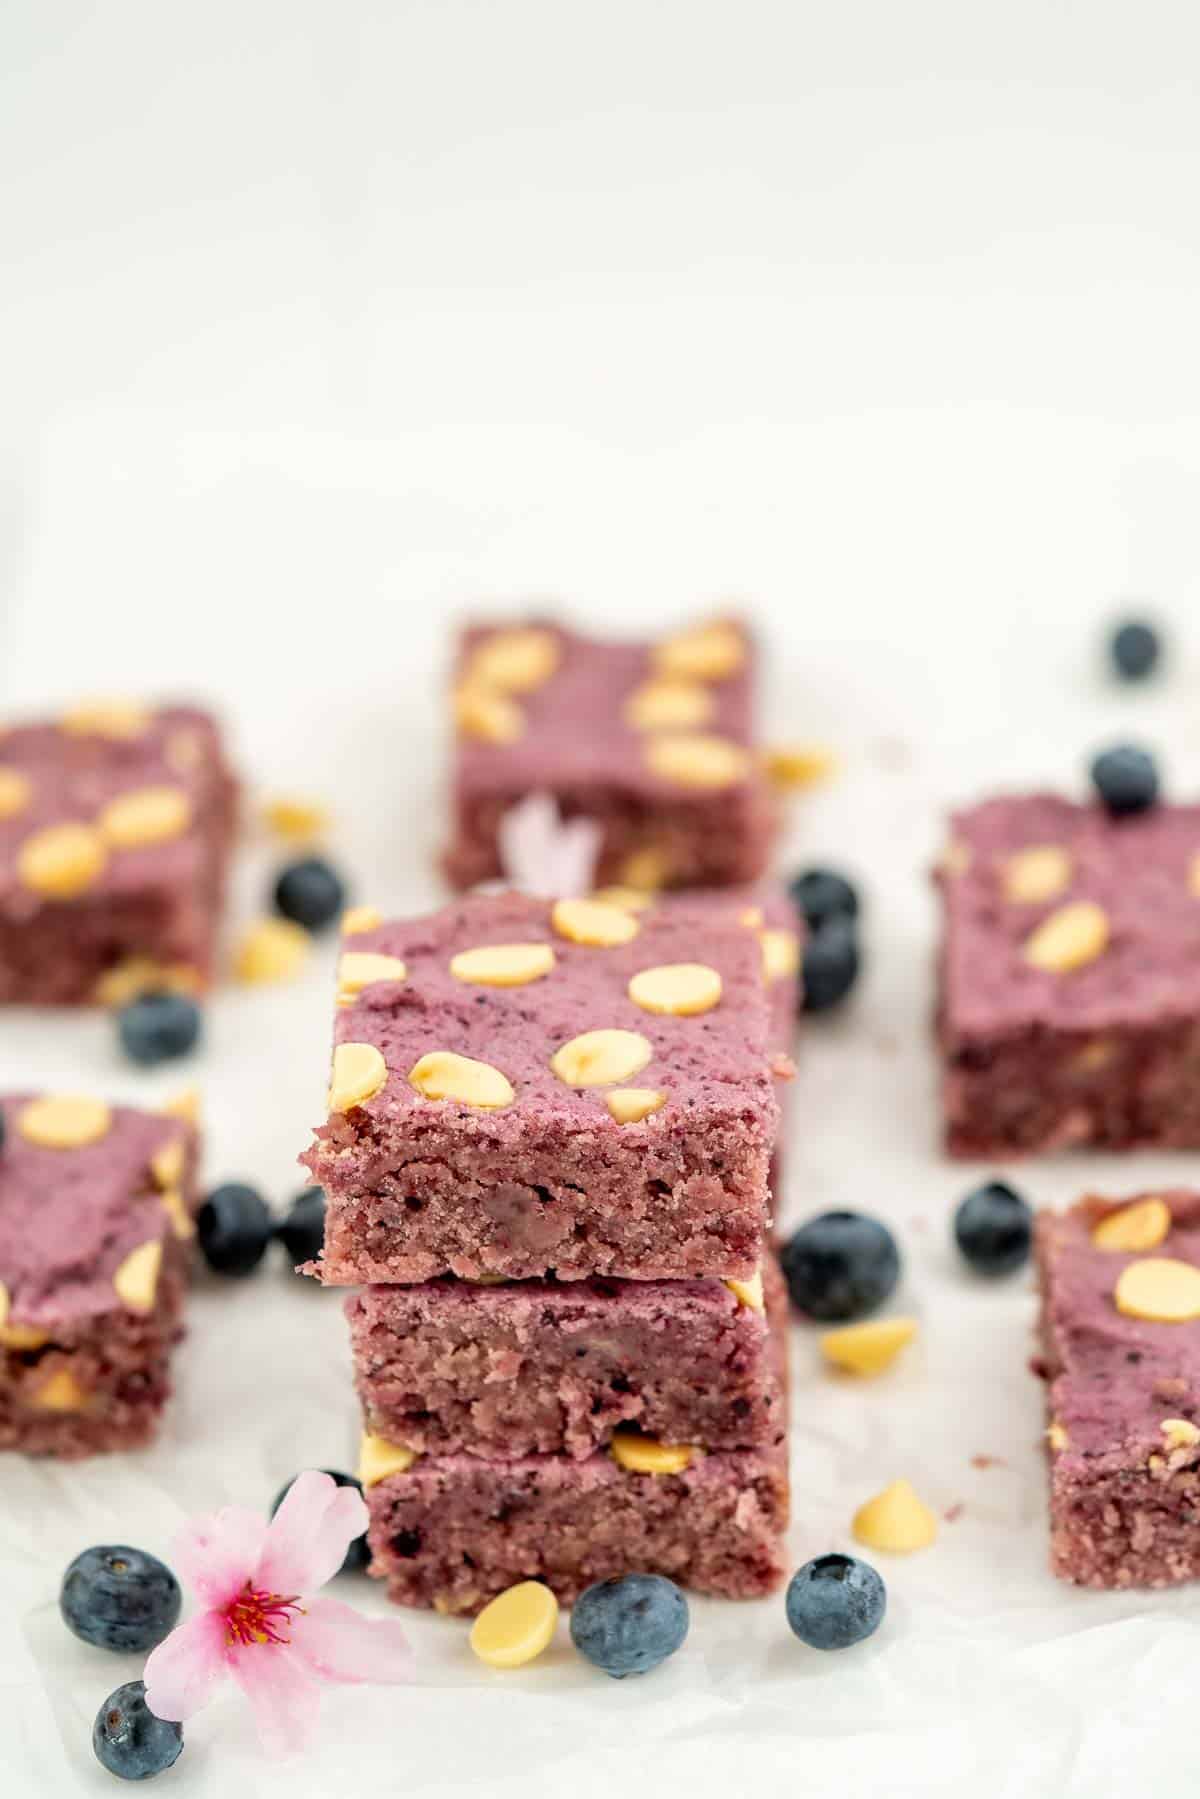 A stack of three blueberry cookie bars sitting on a white surface scattered with blueberries, flowers and white chocolate drops.  